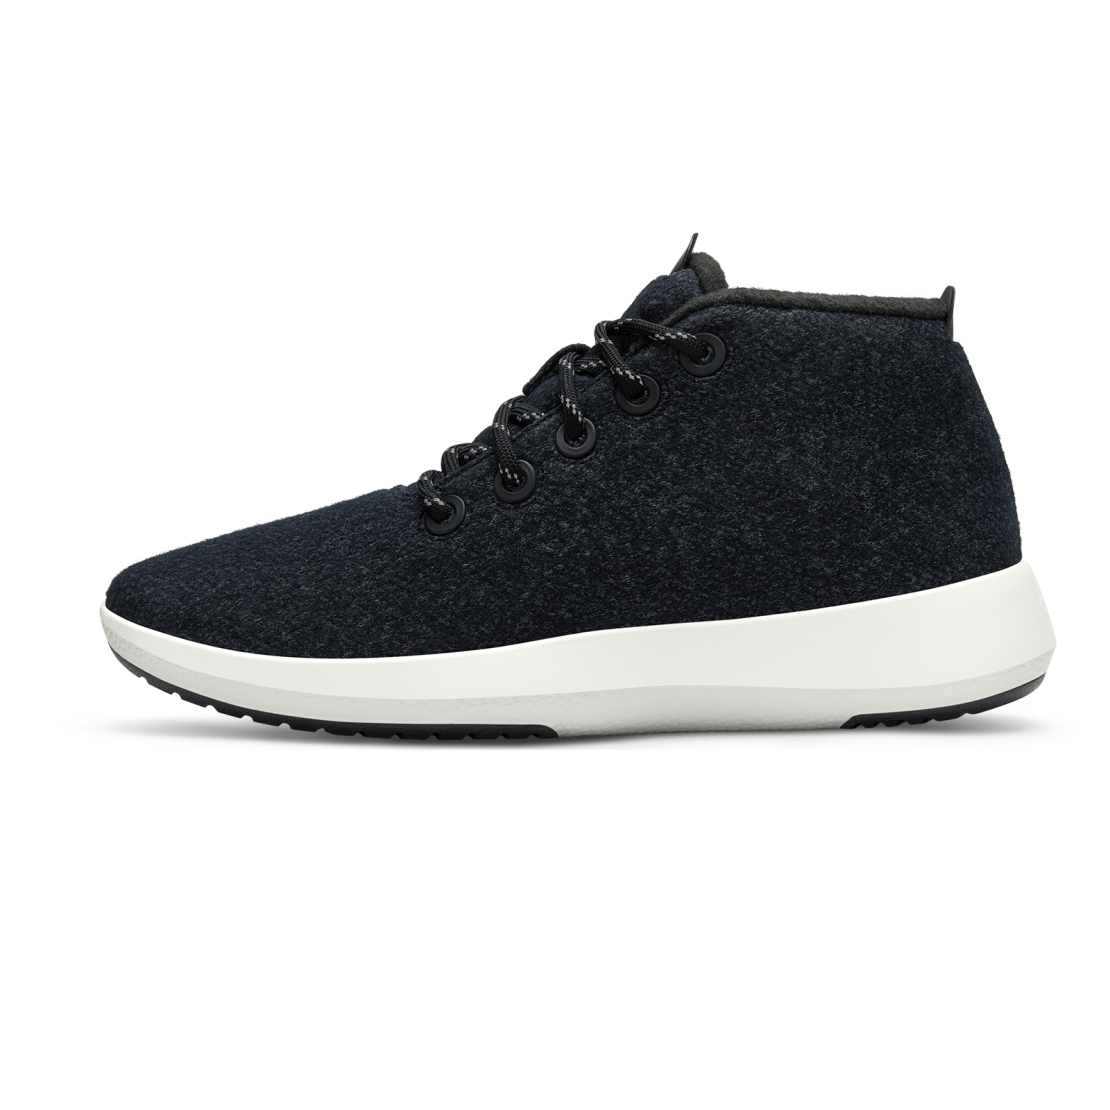 Men's Wool Runner-up Mizzles - Natural Black (Natural White Sole)